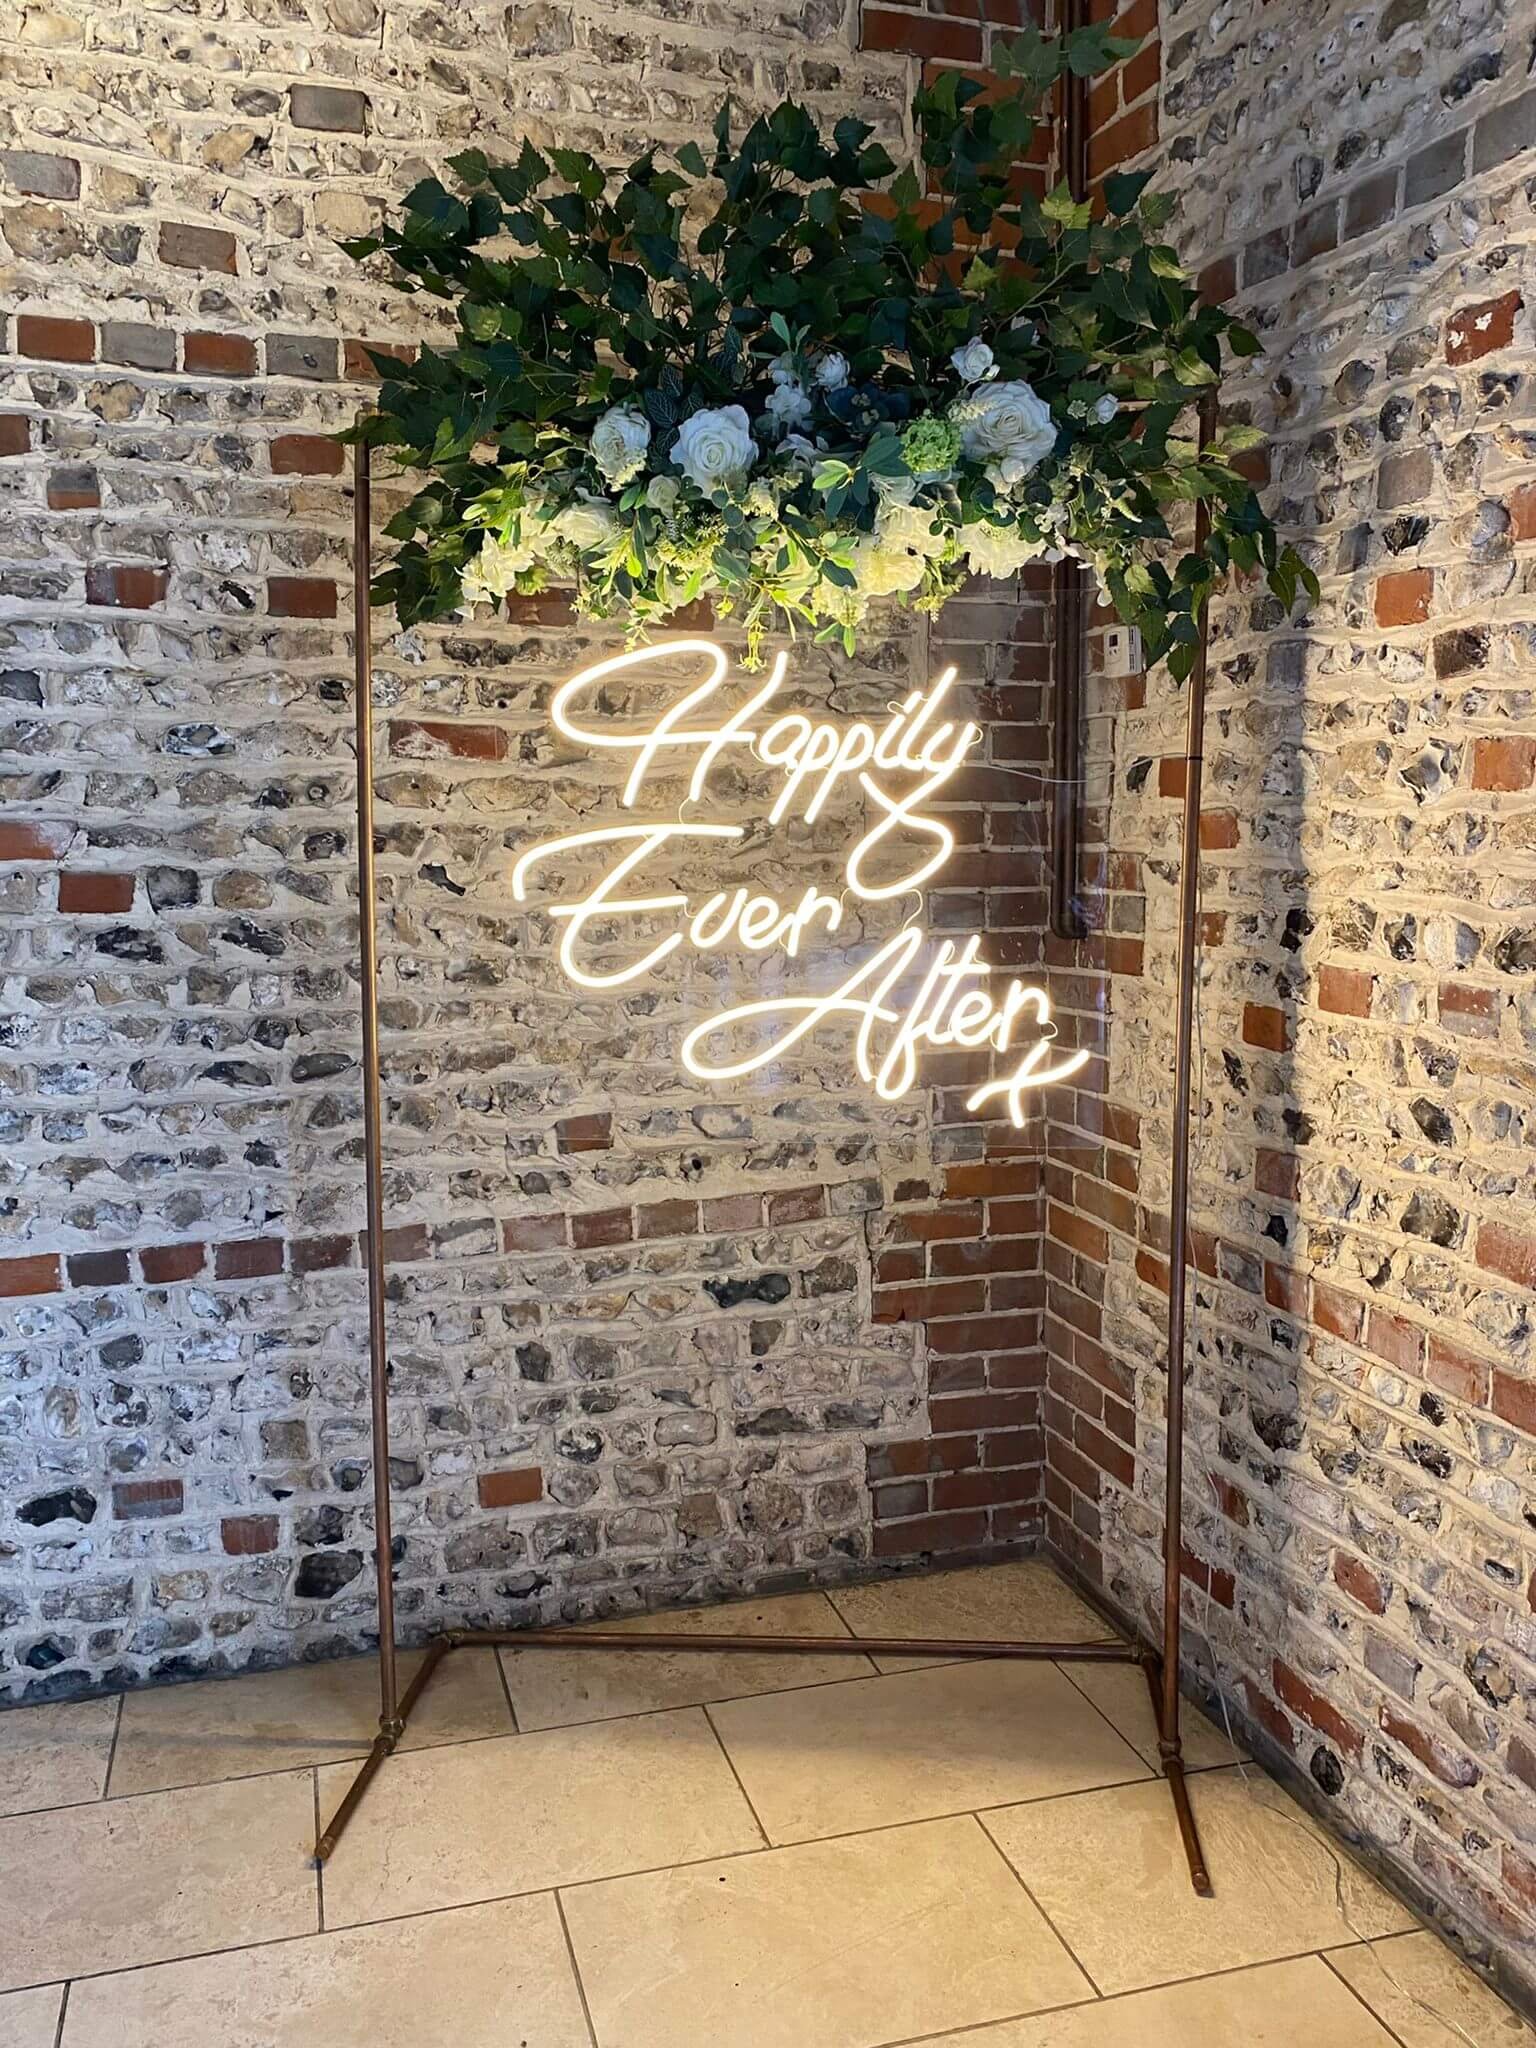 Happily_ever_after_wedding_neon_upwaltham_barns_fauxflorals_sussex.jpg